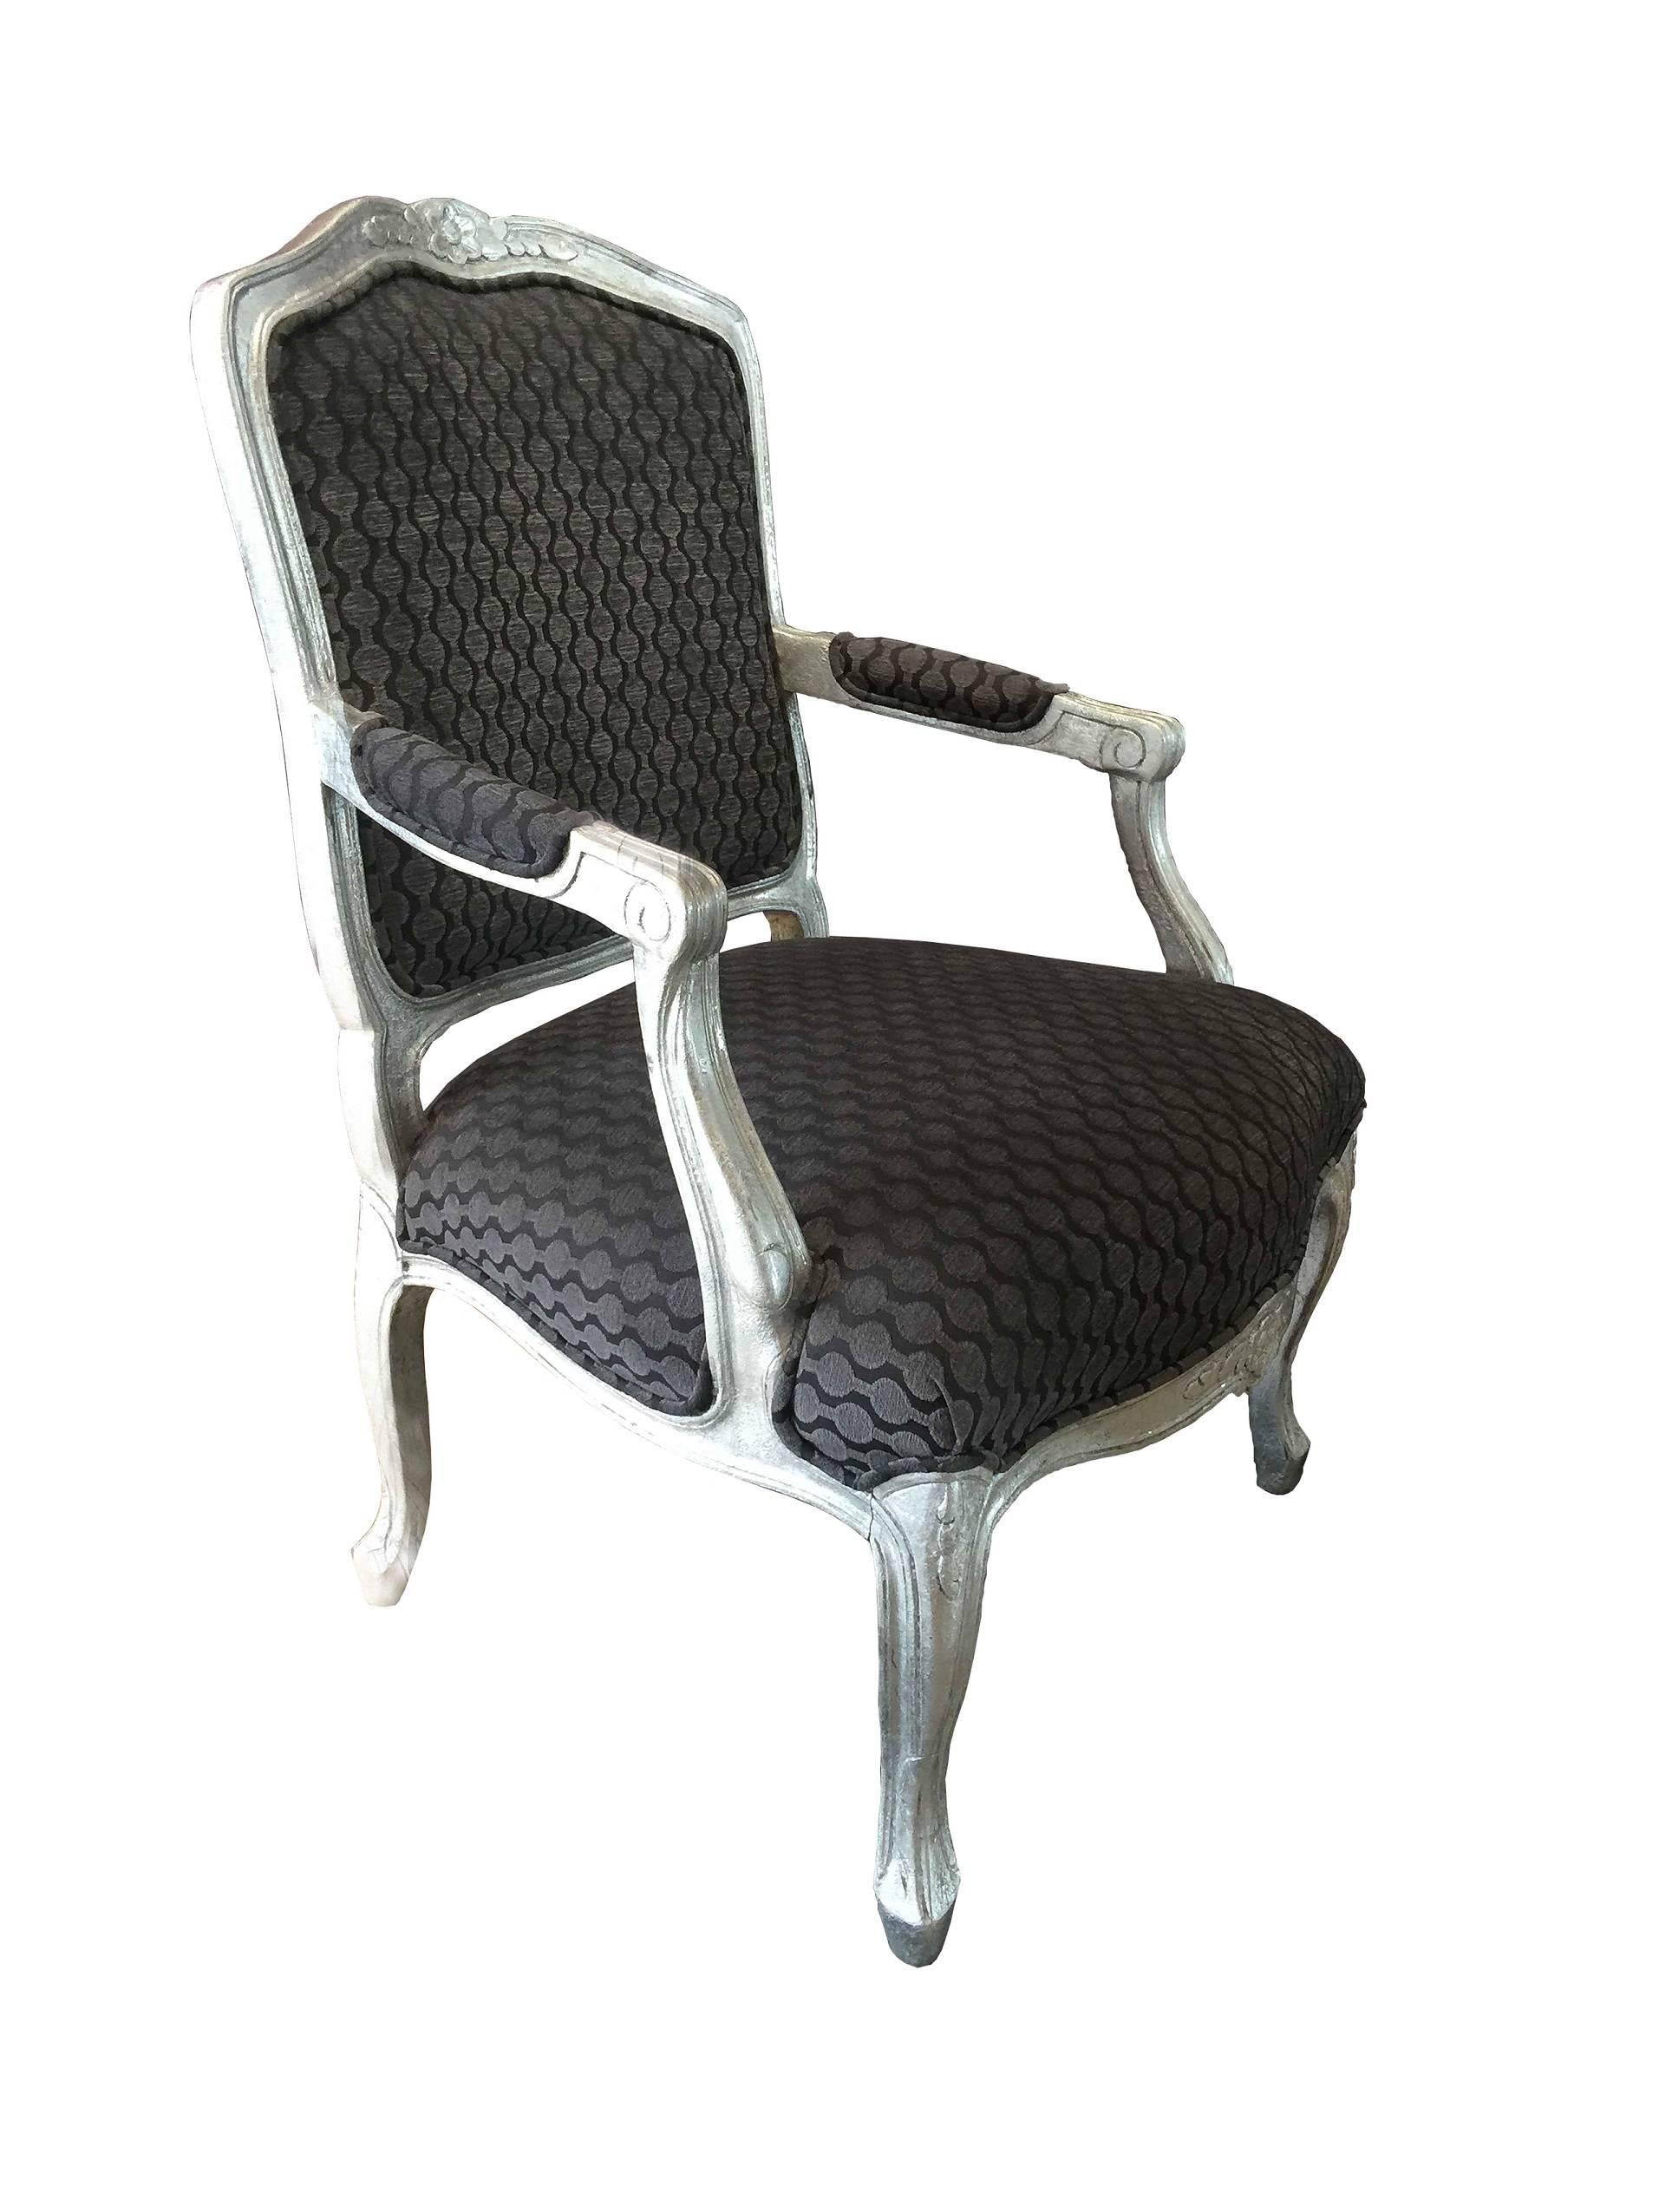 Fauteuils chairs, from the 1960s, have an aluminum leaf and diamond dust finish with Clark & Clark fabric. The curved back and cabriolet legs of the fauteuils were fashionable in the 18th century.  Please note, the fabric is is in great shape, the